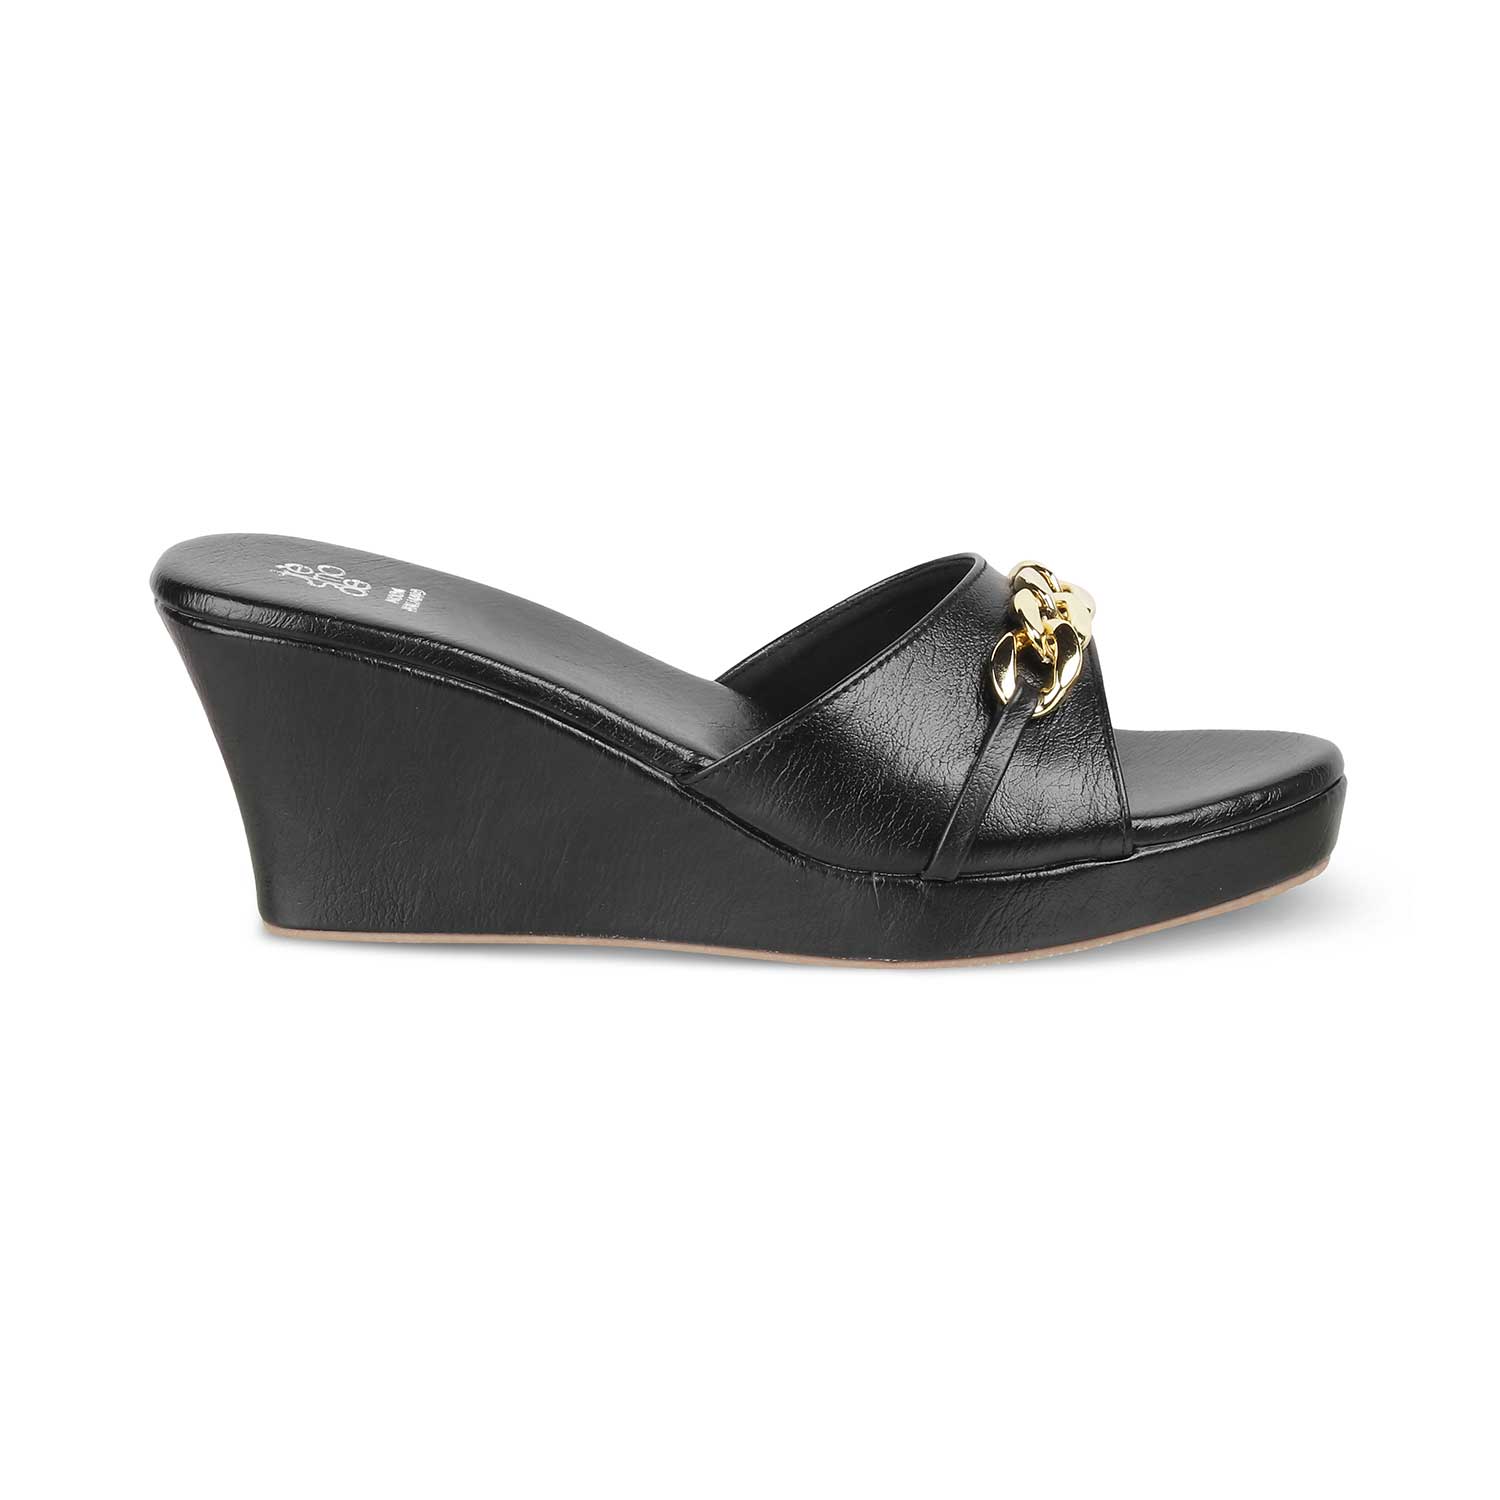 Tresmode-The Chain Black Women's Dress Wedge Sandals Tresmode-Tresmode